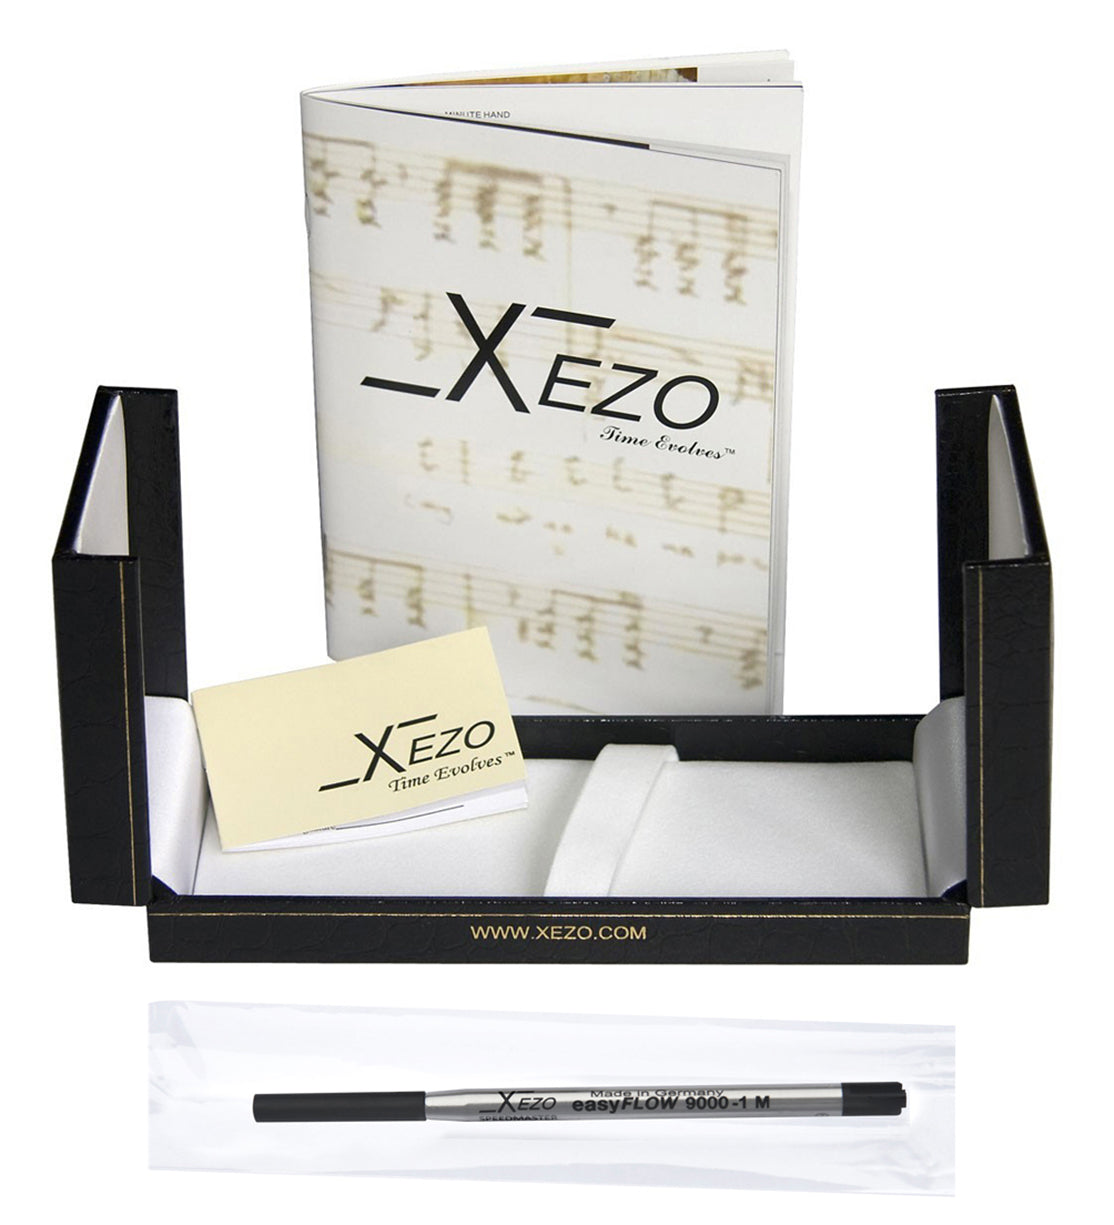 Xezo - Black gift box, certificate, manual, and ink cartridge of the Incognito Forest B ballpoint pen